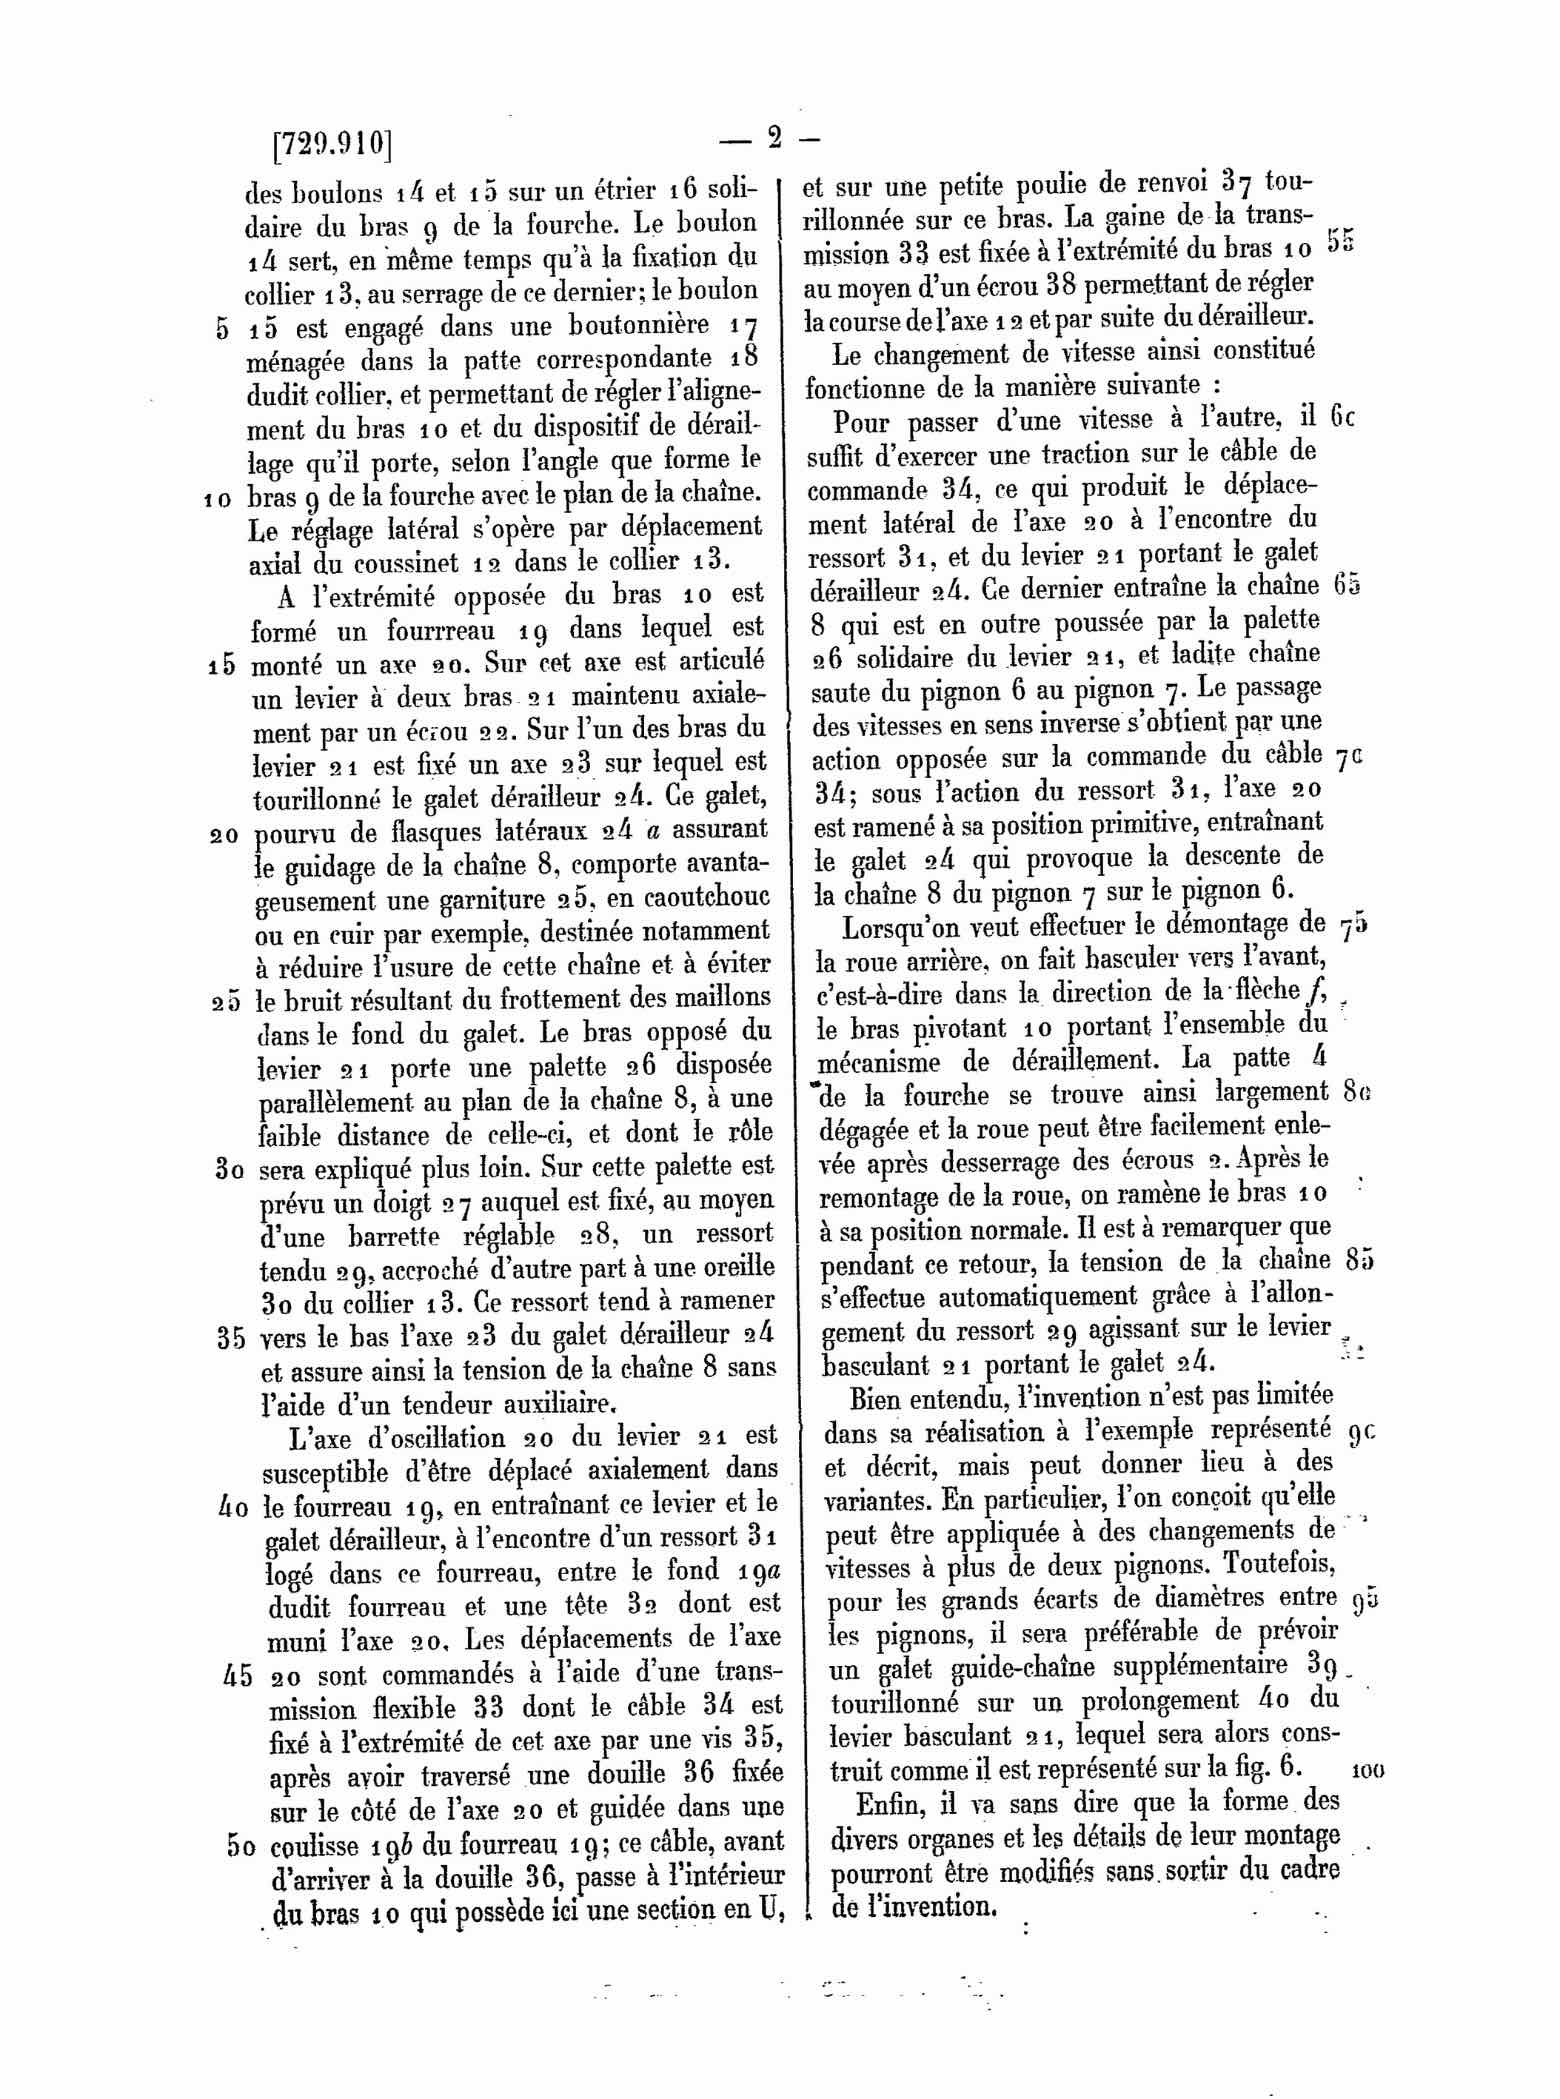 French Patent 729,910 - Huret scan 2 main image